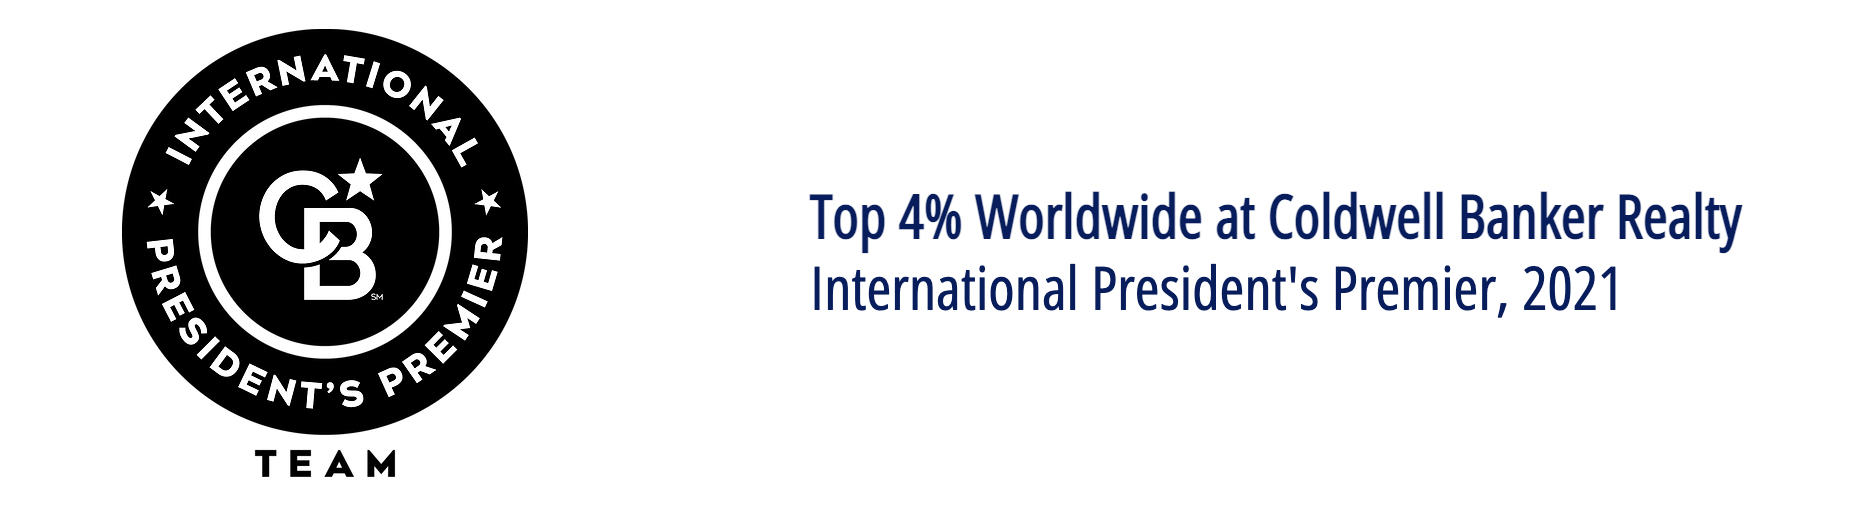 Top 4% Worldwide at Coldwell Banker Realty - International President's Premier, 2021